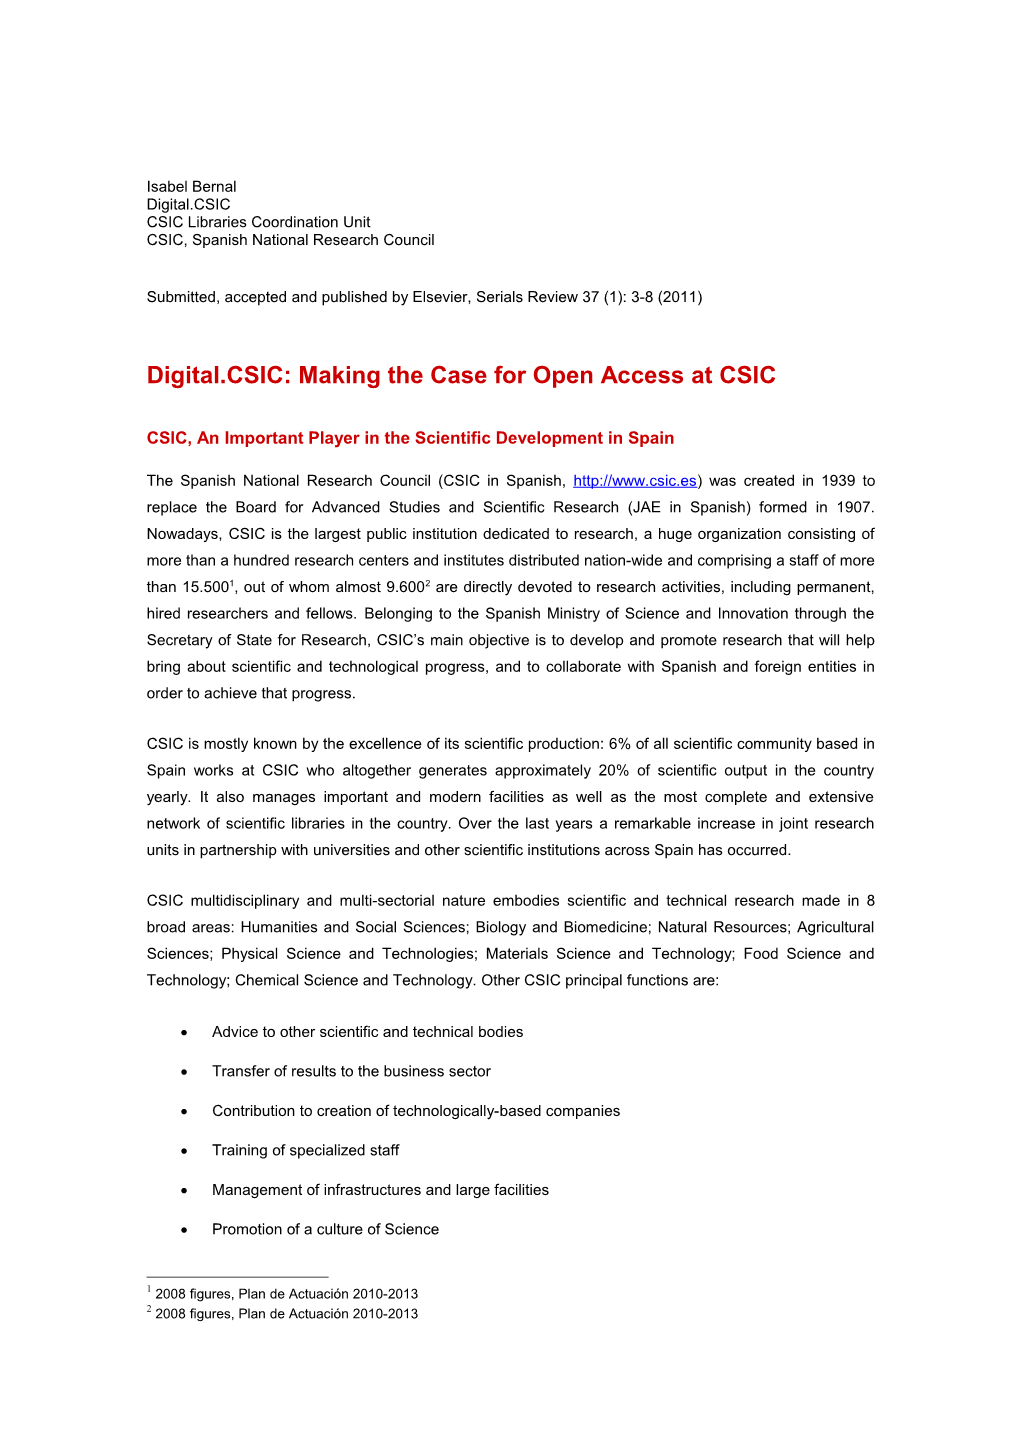 Digital.CSIC: Making the Case for Open Access at CSIC